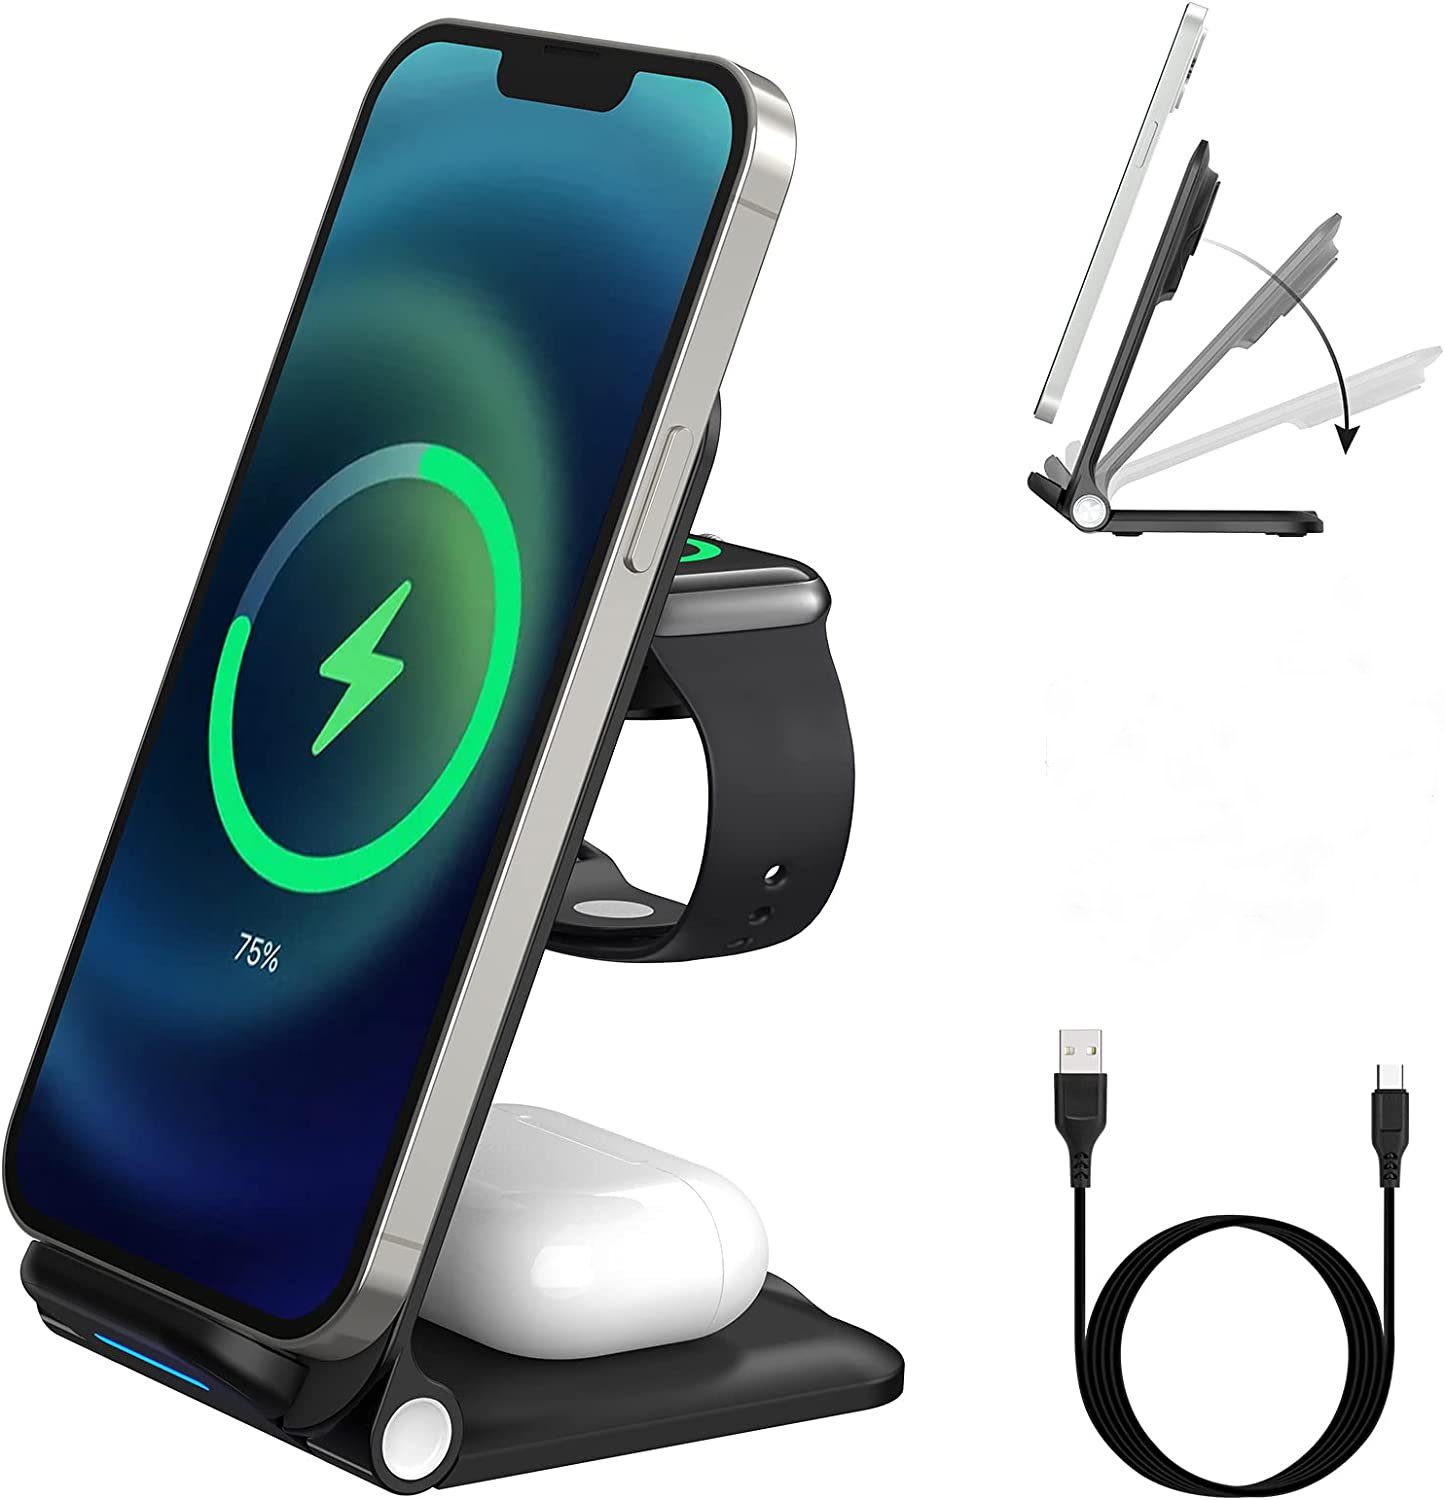 Mutoy 3 in1 Faltbar Kabelloses Ladegerät,Fast Wireless Charger mit